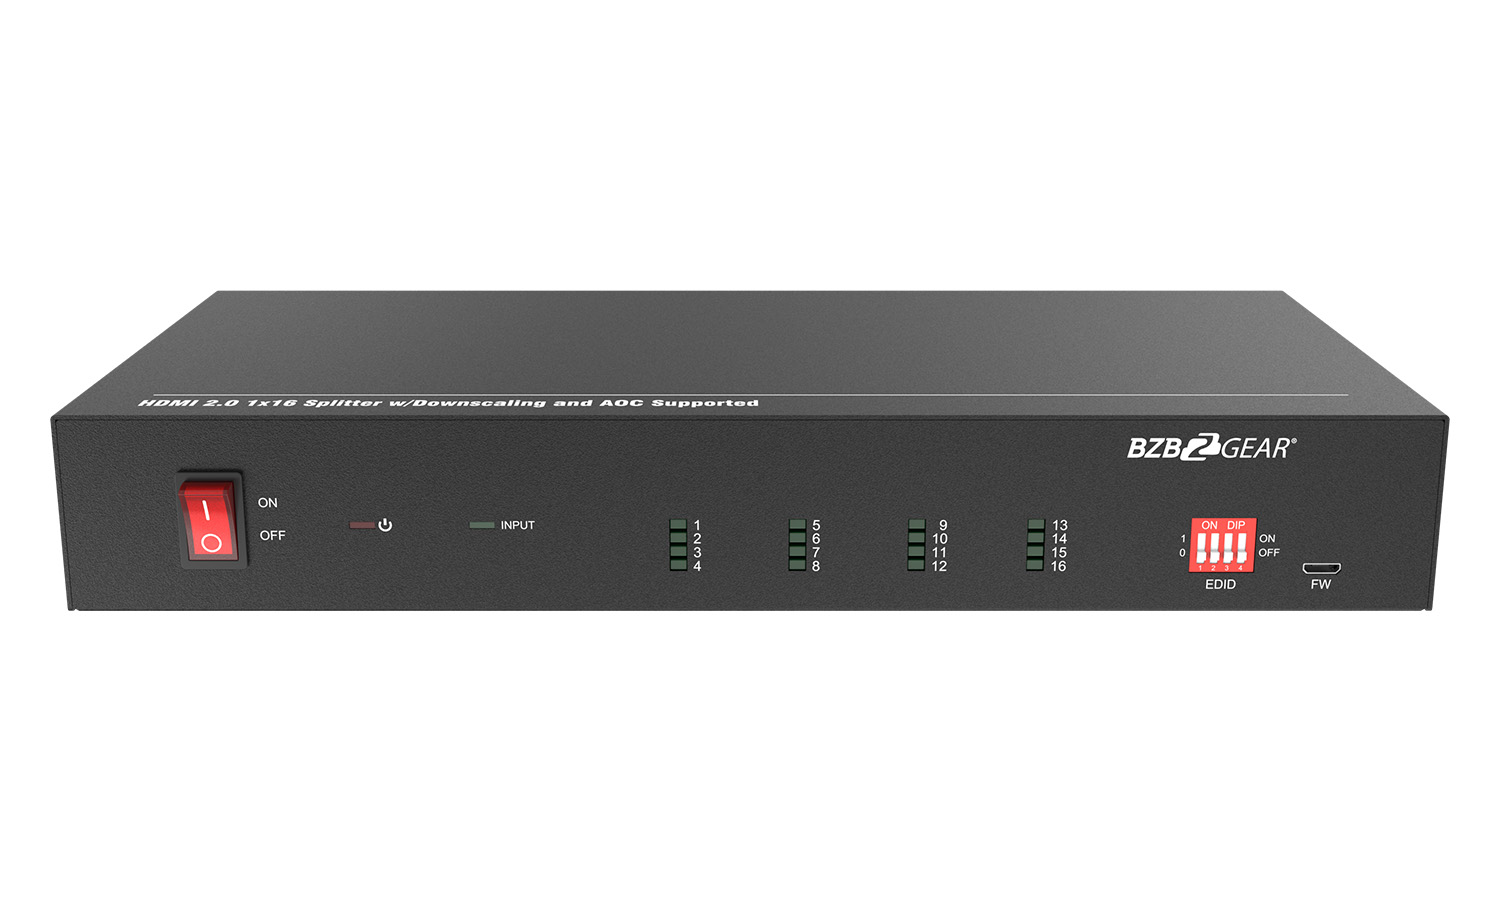 BG-UHD-DA1X16 1x16 4K UHD HDMI Splitter/Distribution Amplifier with Downscaling and AOC Supported by BZBGEAR